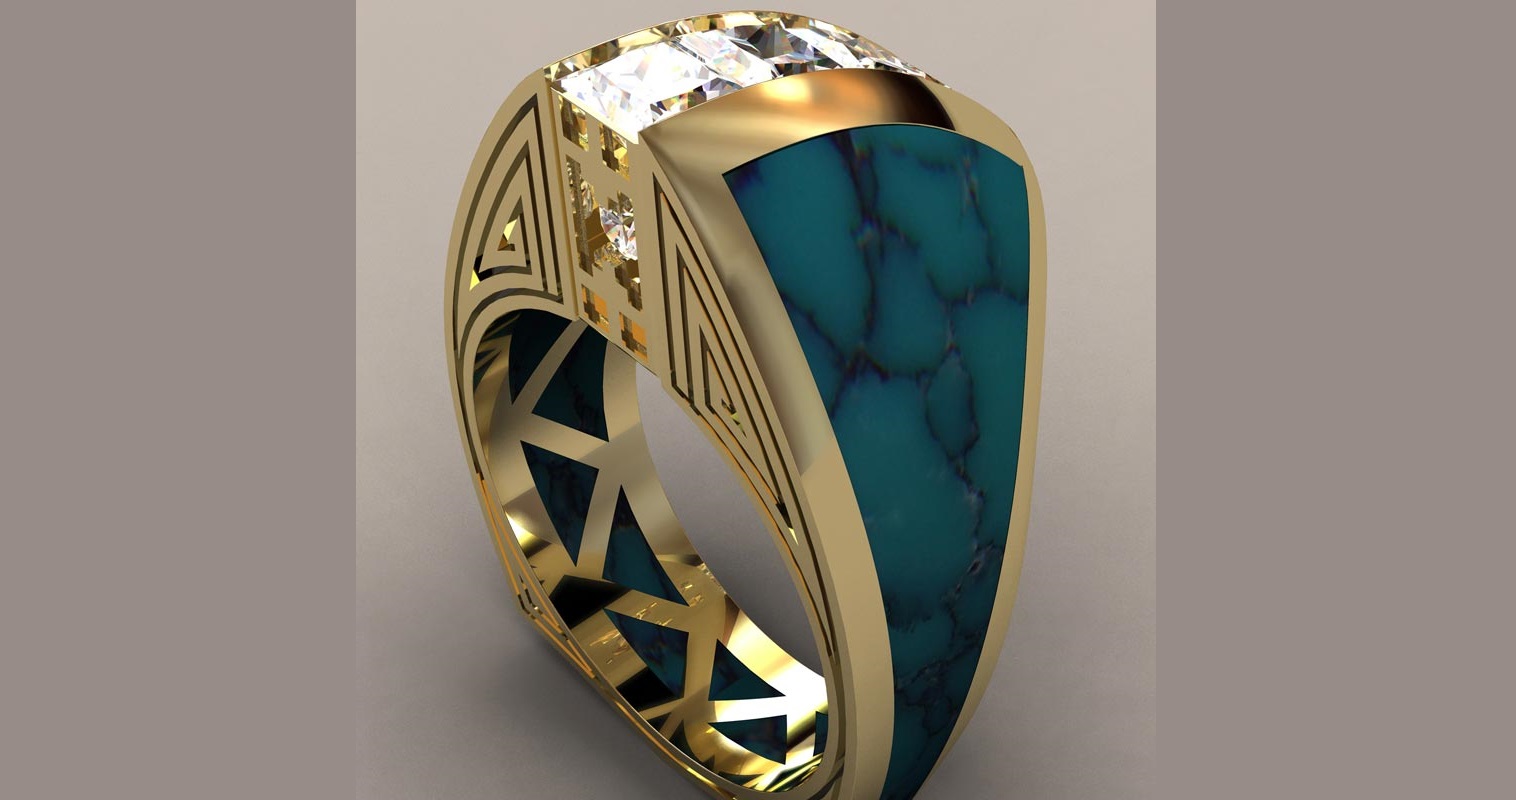 Indian Princess is an 18k yellow gold ladies ring